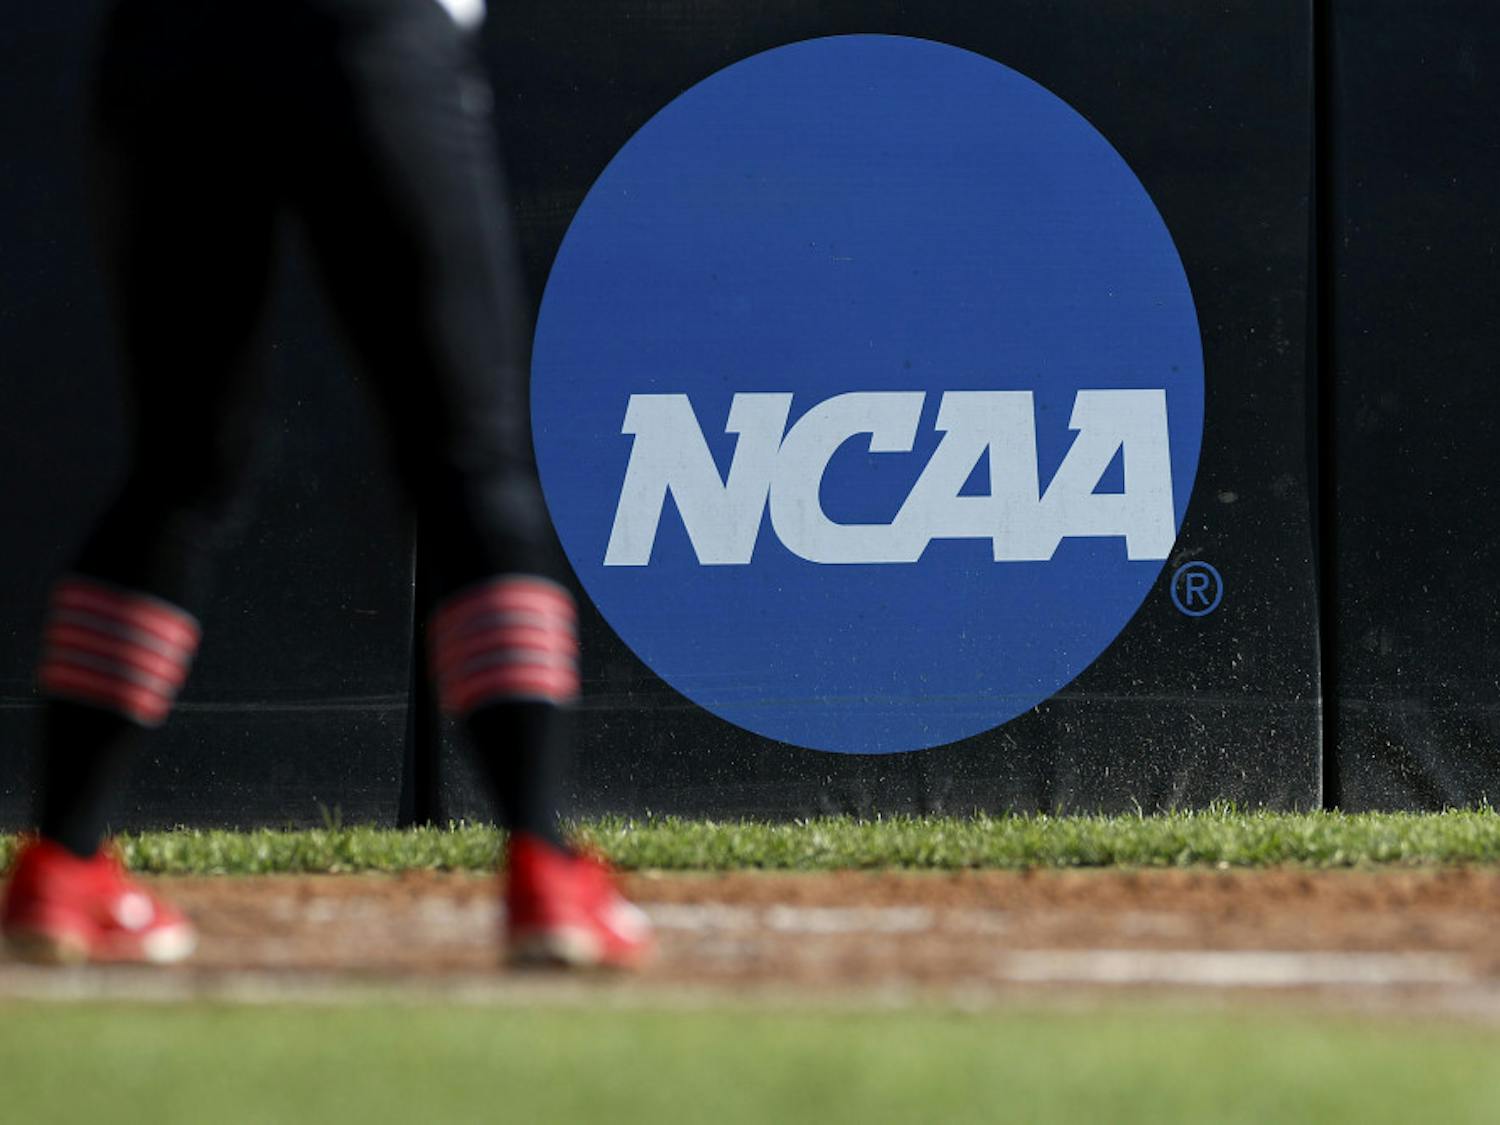 FILE - In this April 19, 2019, file photo, an athlete stands near a NCAA logo during a softball game in Beaumont, Texas. The NCAA is poised to take a significant step toward allowing college athletes to earn money without violating amateurism rules. The Board of Governors will be briefed Tuesday, Oct. 29 by administrators who have been examining whether it would be feasible to allow college athletes to profit of their names, images and likenesses. A California law set to take effect in 2023 would make it illegal for NCAA schools in the state to prevent athletes from signing personal endorsement deals. (AP Photo/Aaron M. Sprecher, File)